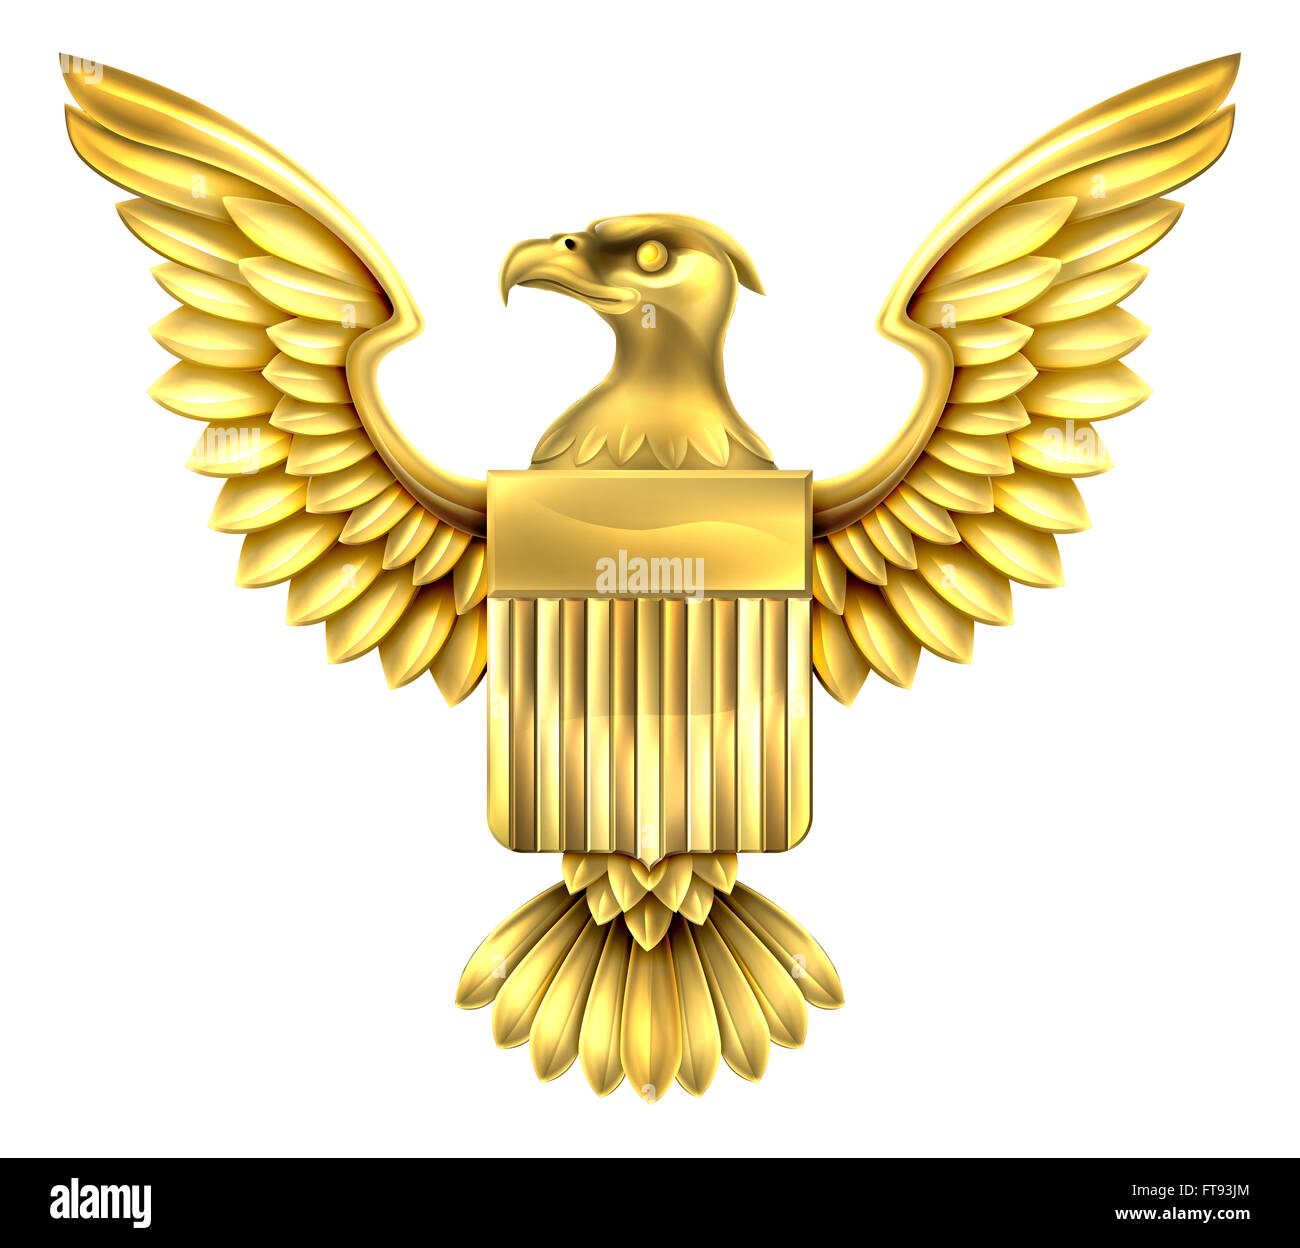 Gold golden metal American Eagle Design with bald eagle of the United States with American flag shield Stock Photo